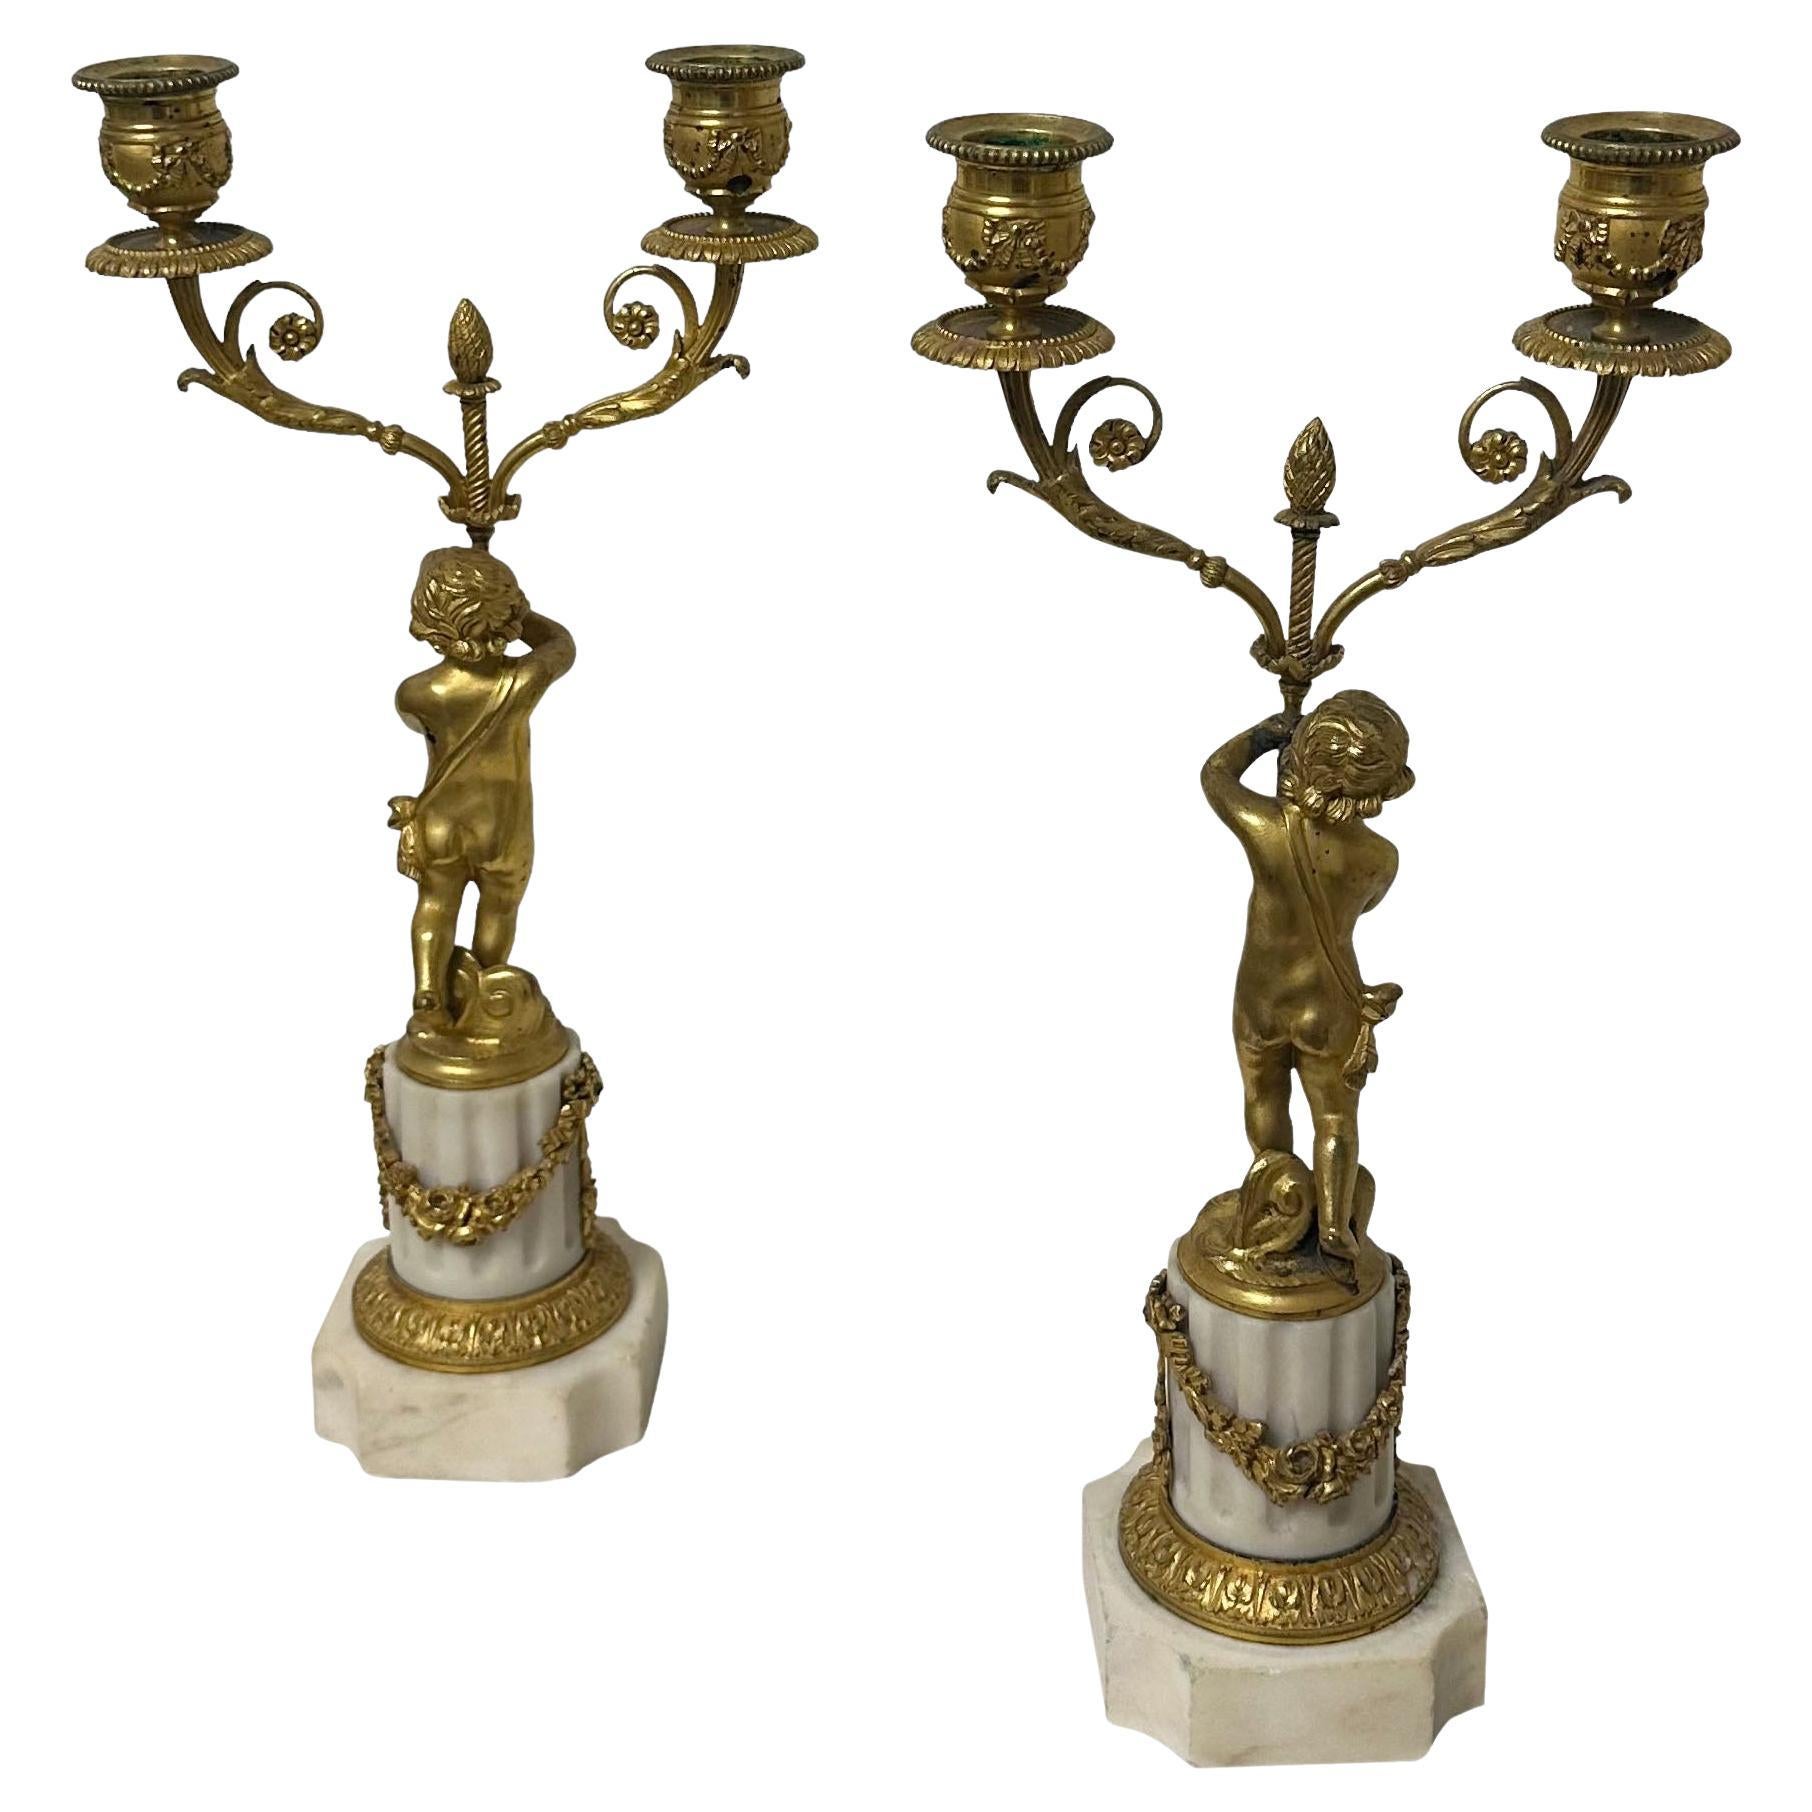 A very elegant pair of early 19th century bronze and marble candleholders with putti, an acorn, swags and bows. 